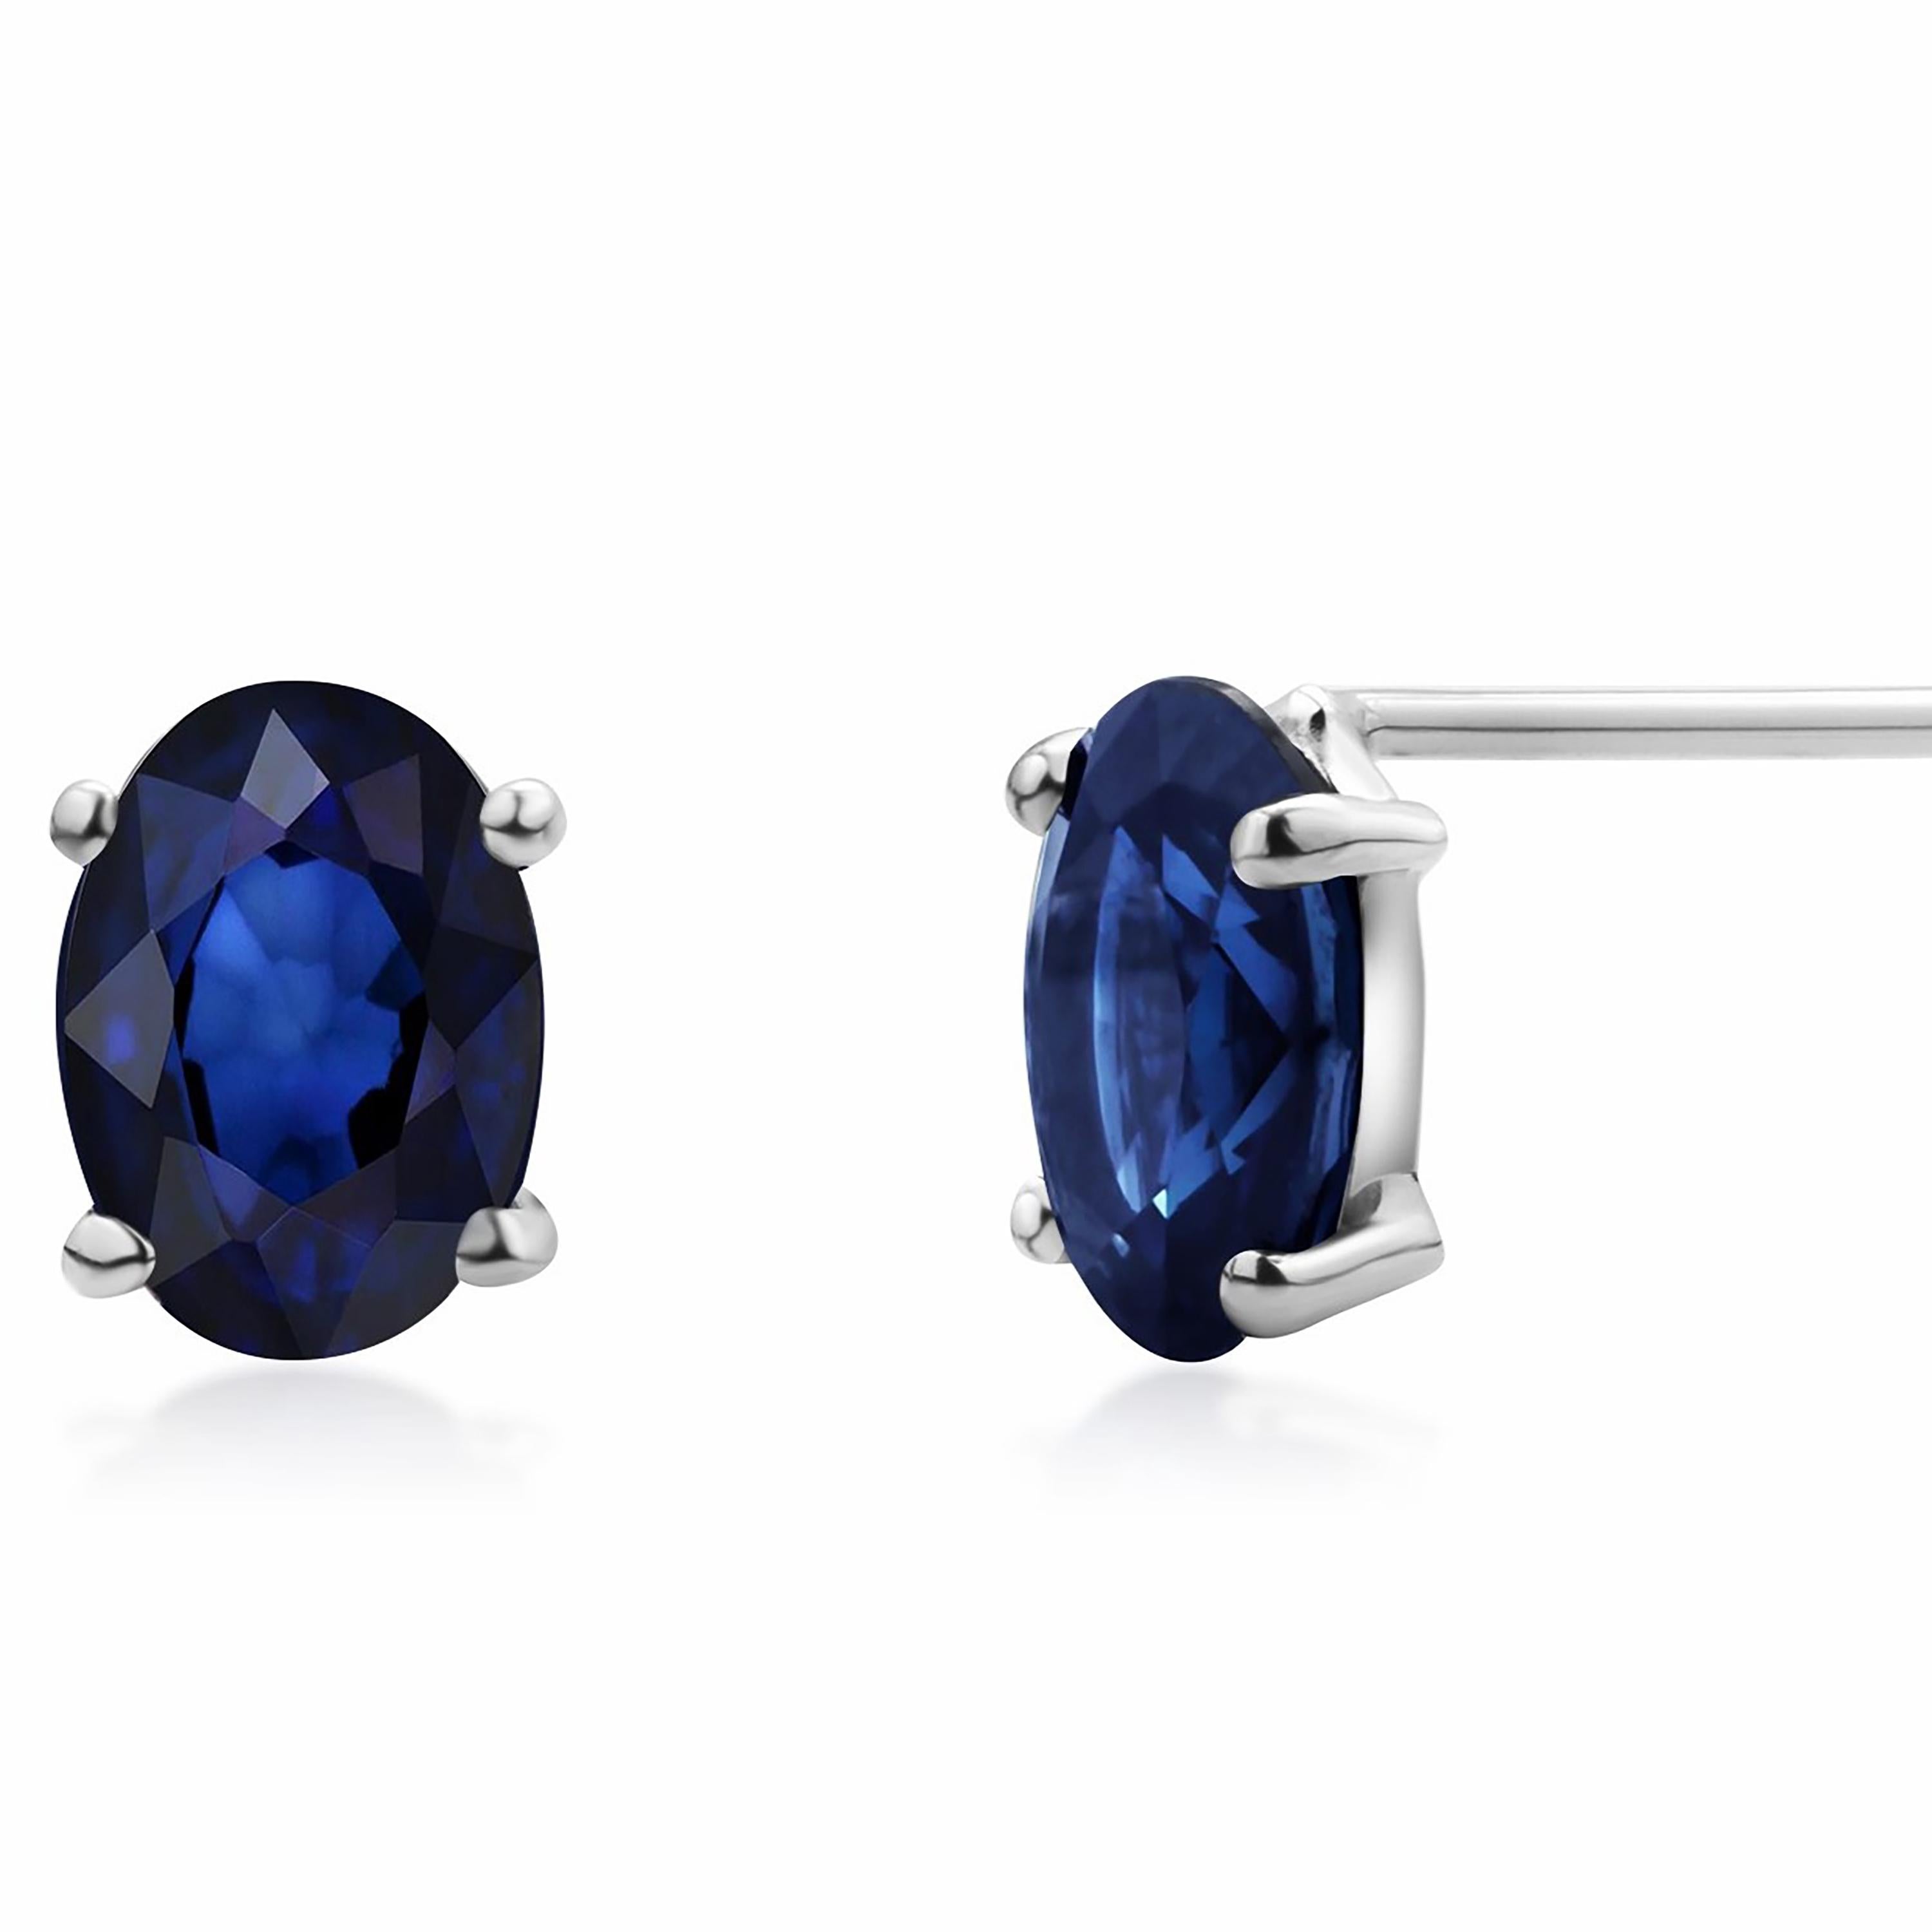 Matched Oval Sapphire 1.80 Carat White Gold 0.27 Inch Long Stud Earrings In New Condition For Sale In New York, NY